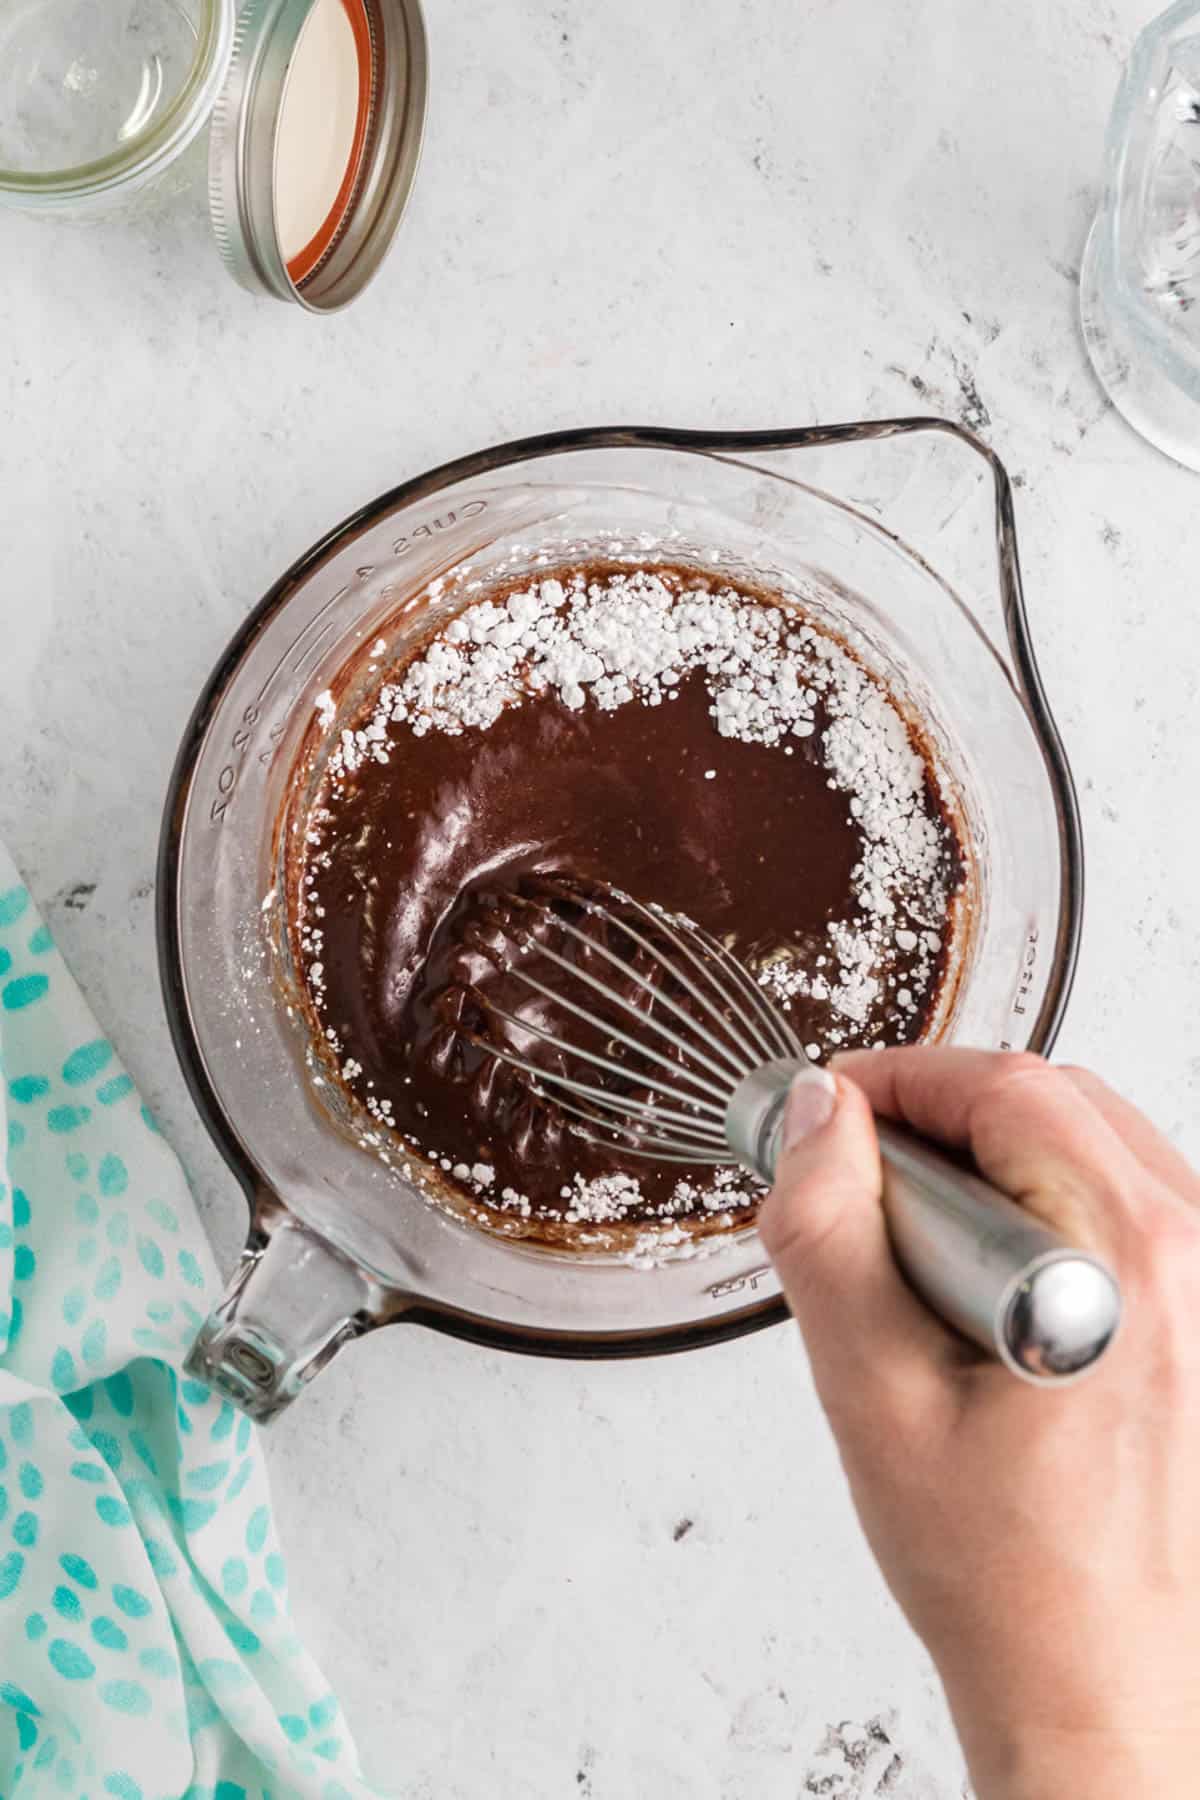 A hand holding a whisk whisking ingredients to make hot fudge sauce.